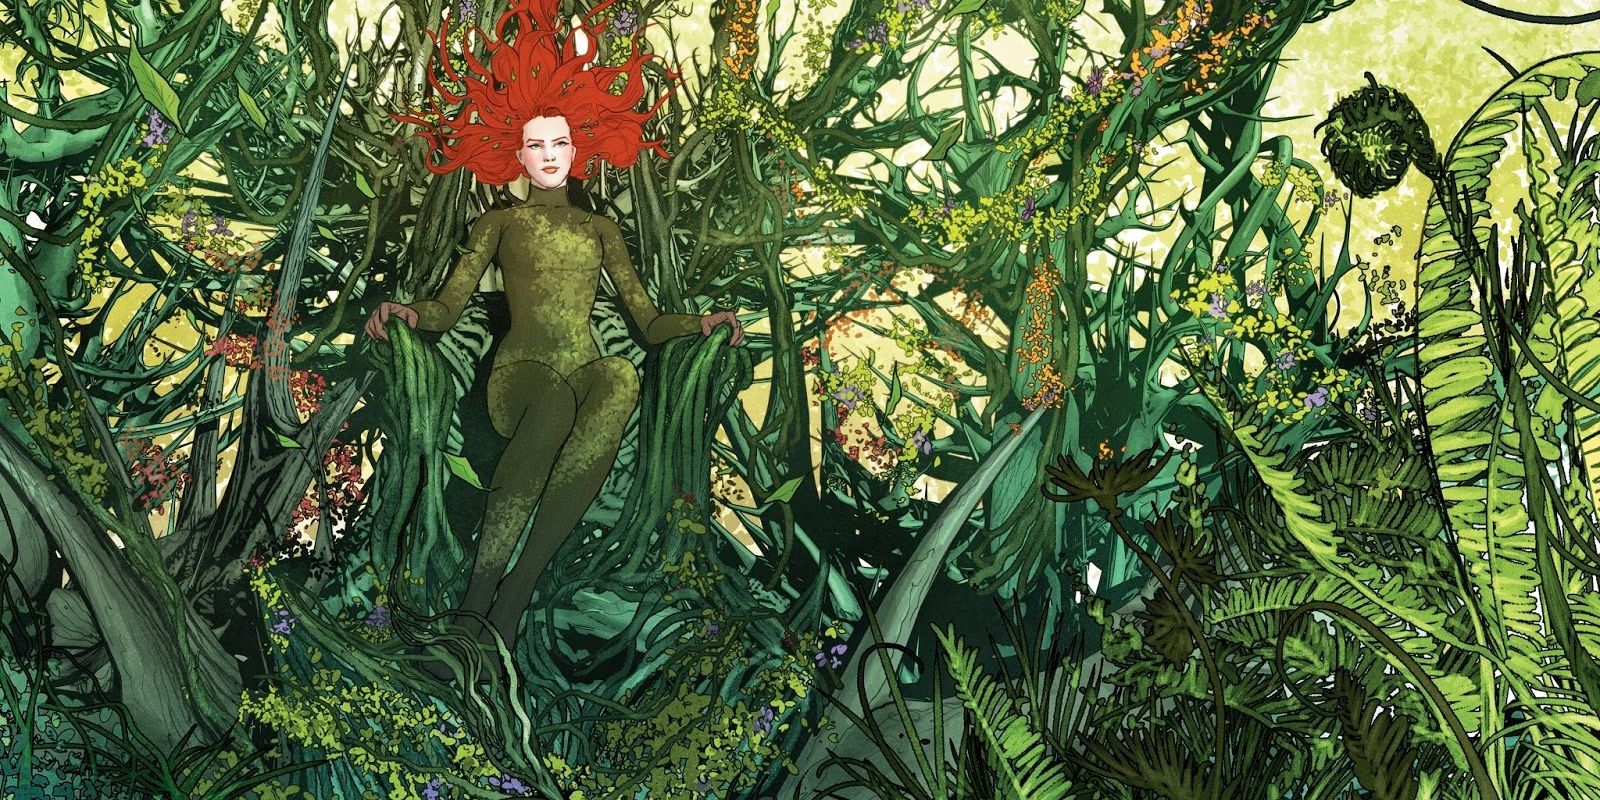 Batman villain Poison Ivy sitting on a throne made of vines surrounded by various plants and trees